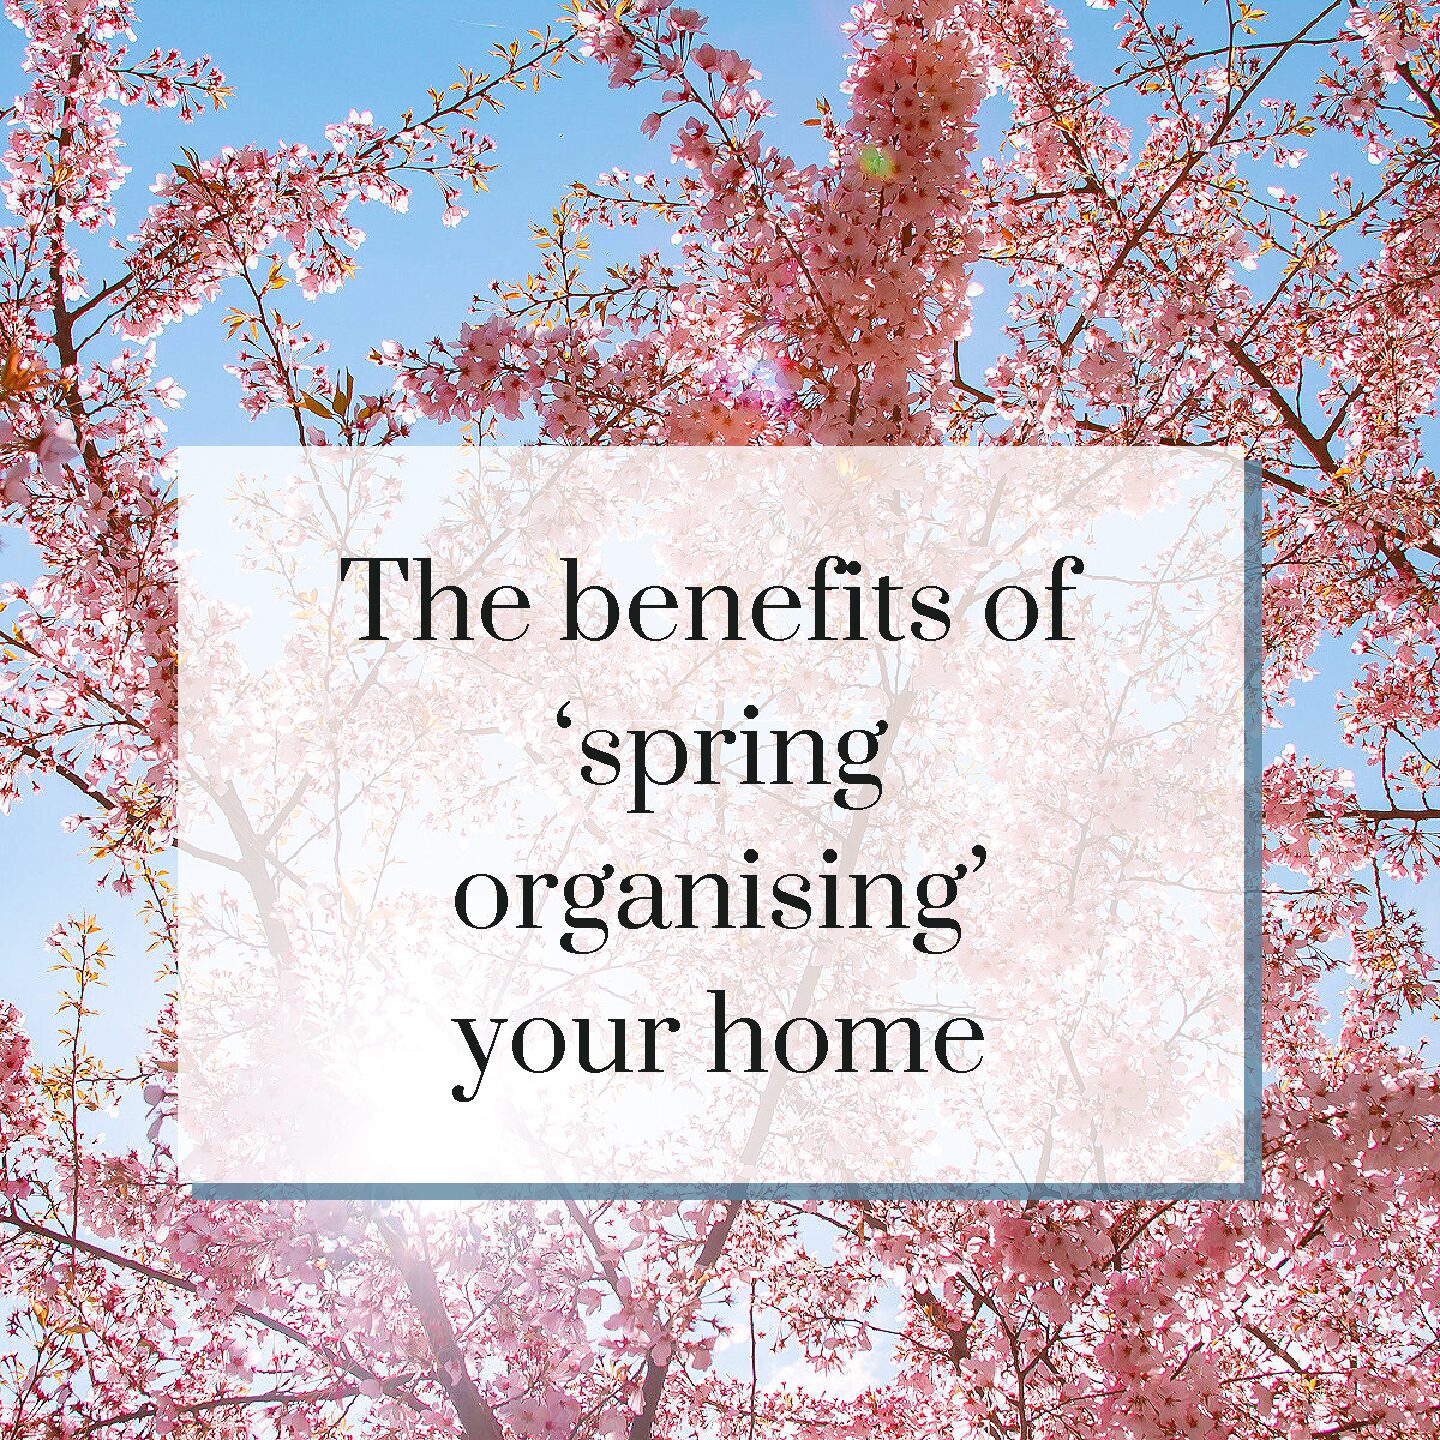 The benefits of ‘Spring Organising’ your home!